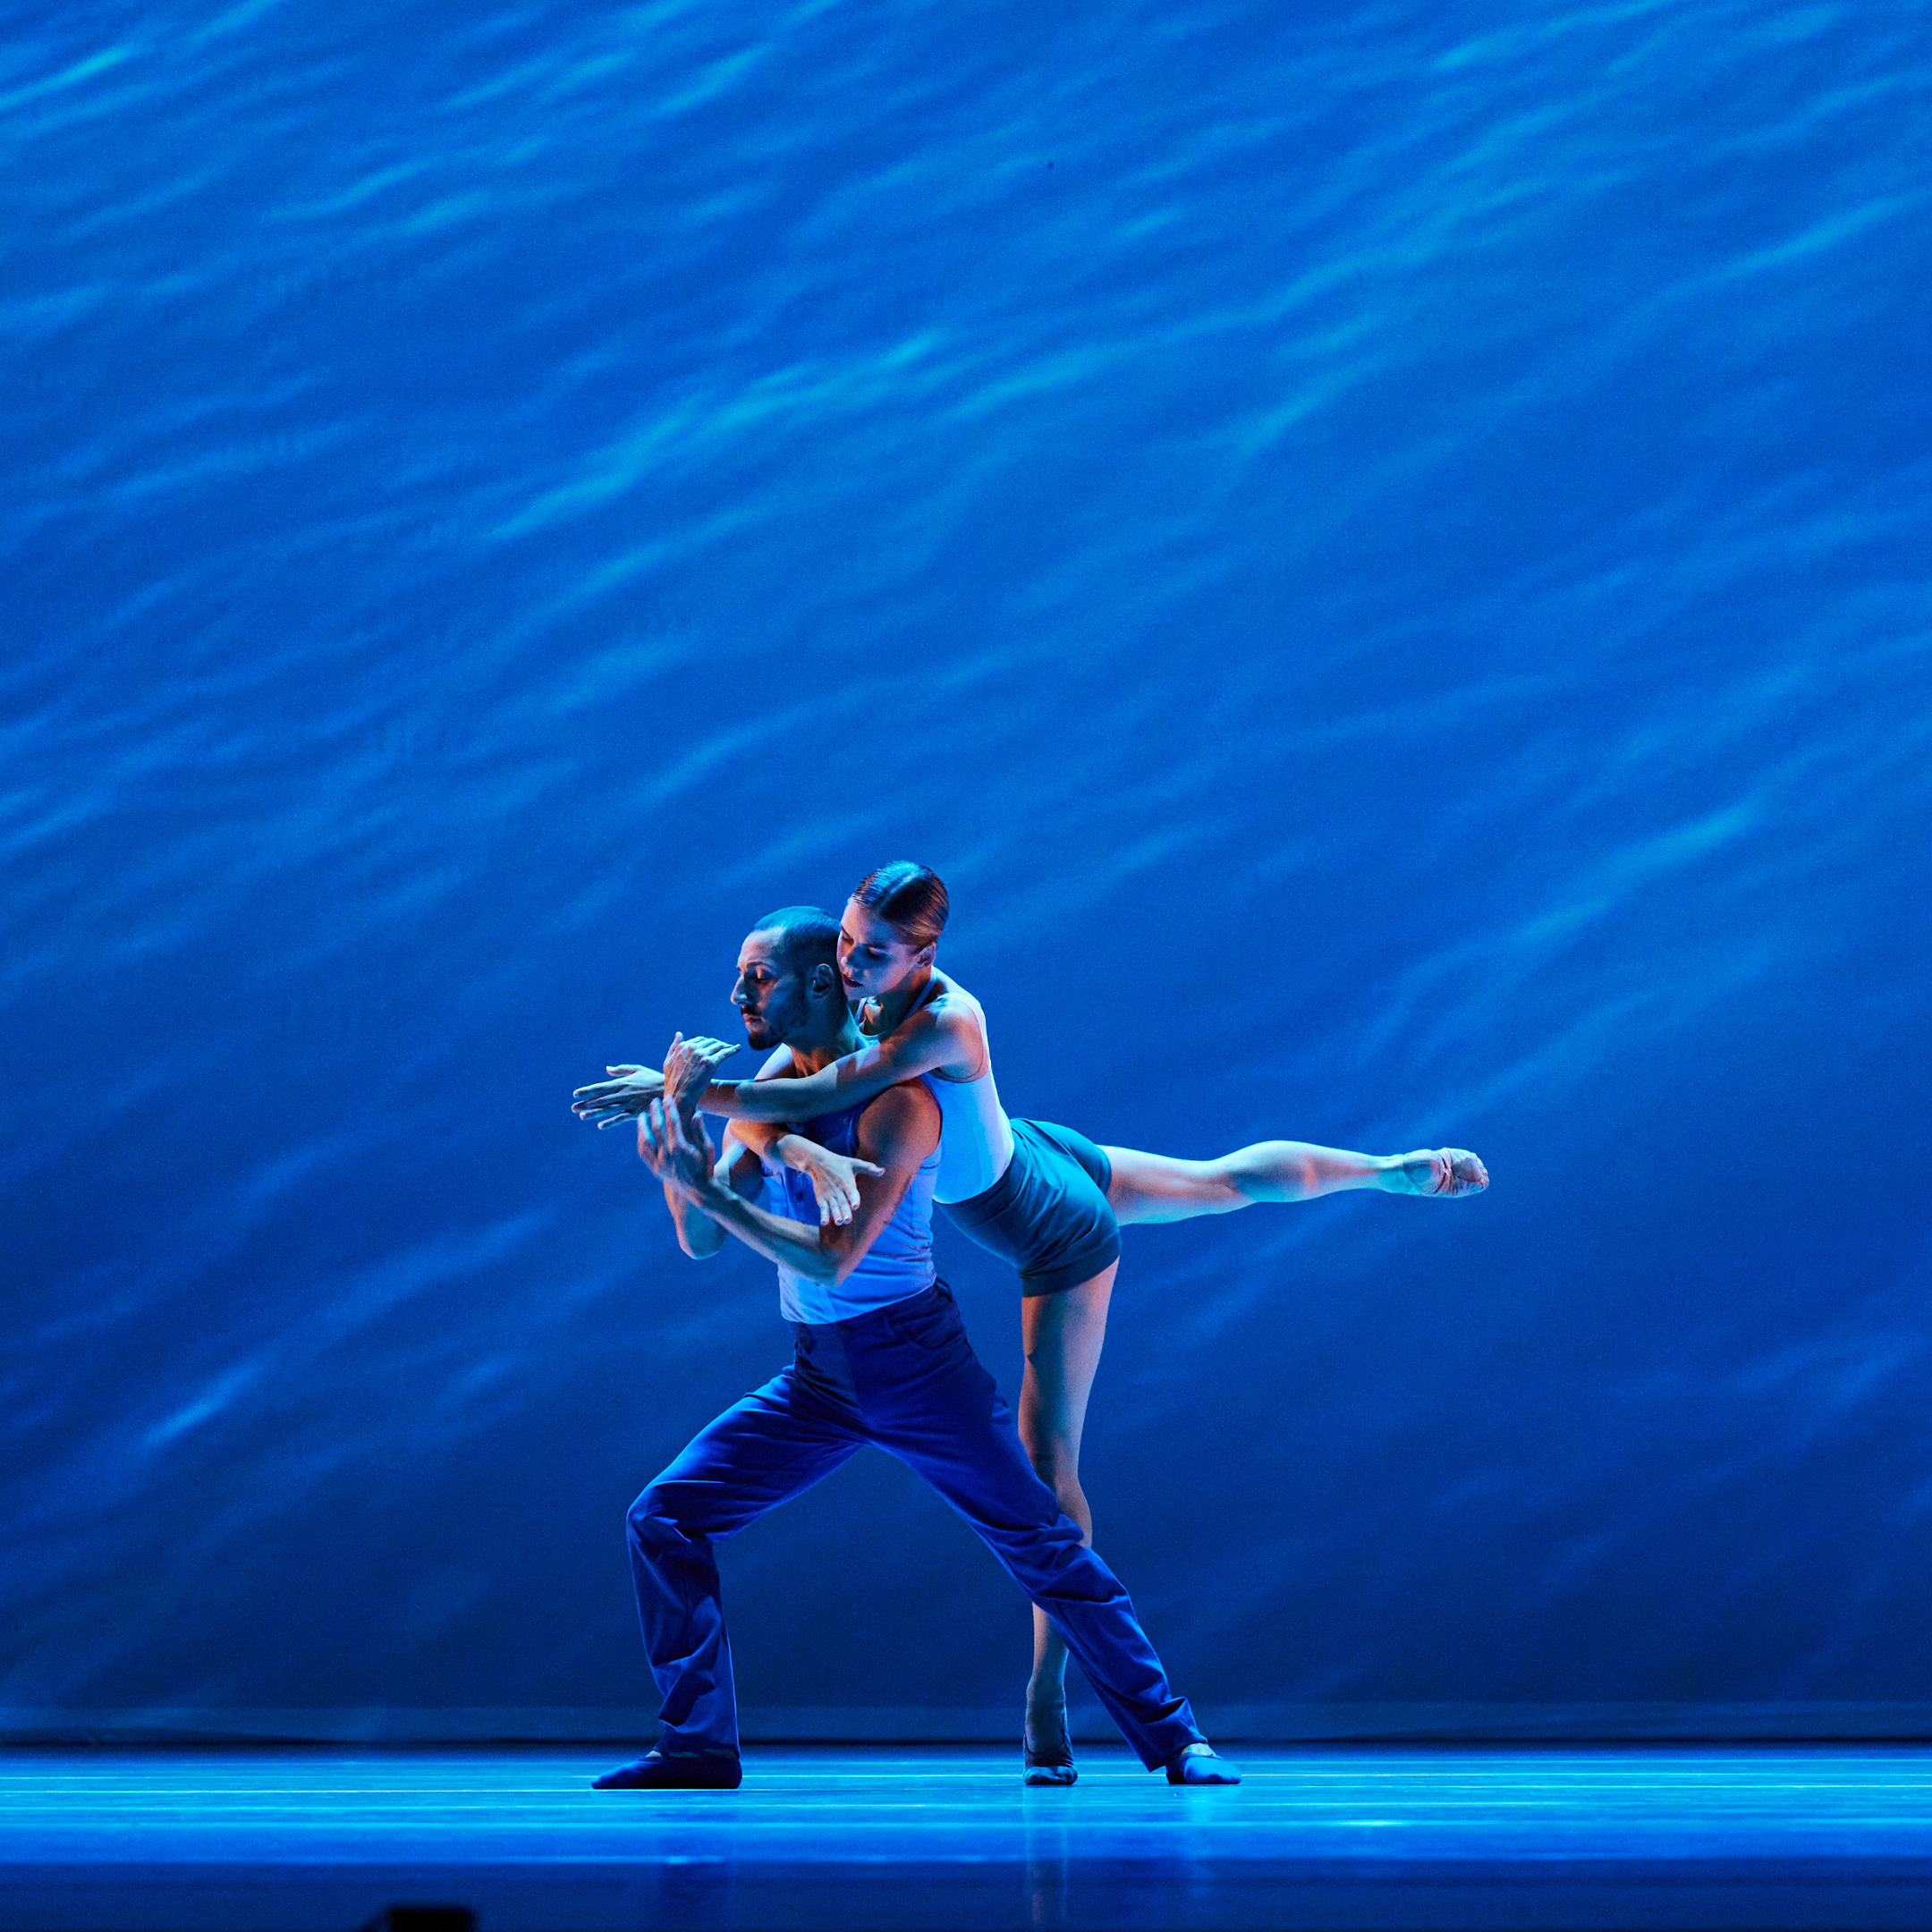 Brooke Newman Falsetti and Giuseppe Calabrese in "Océana" by Lucinda Childs, Introdans